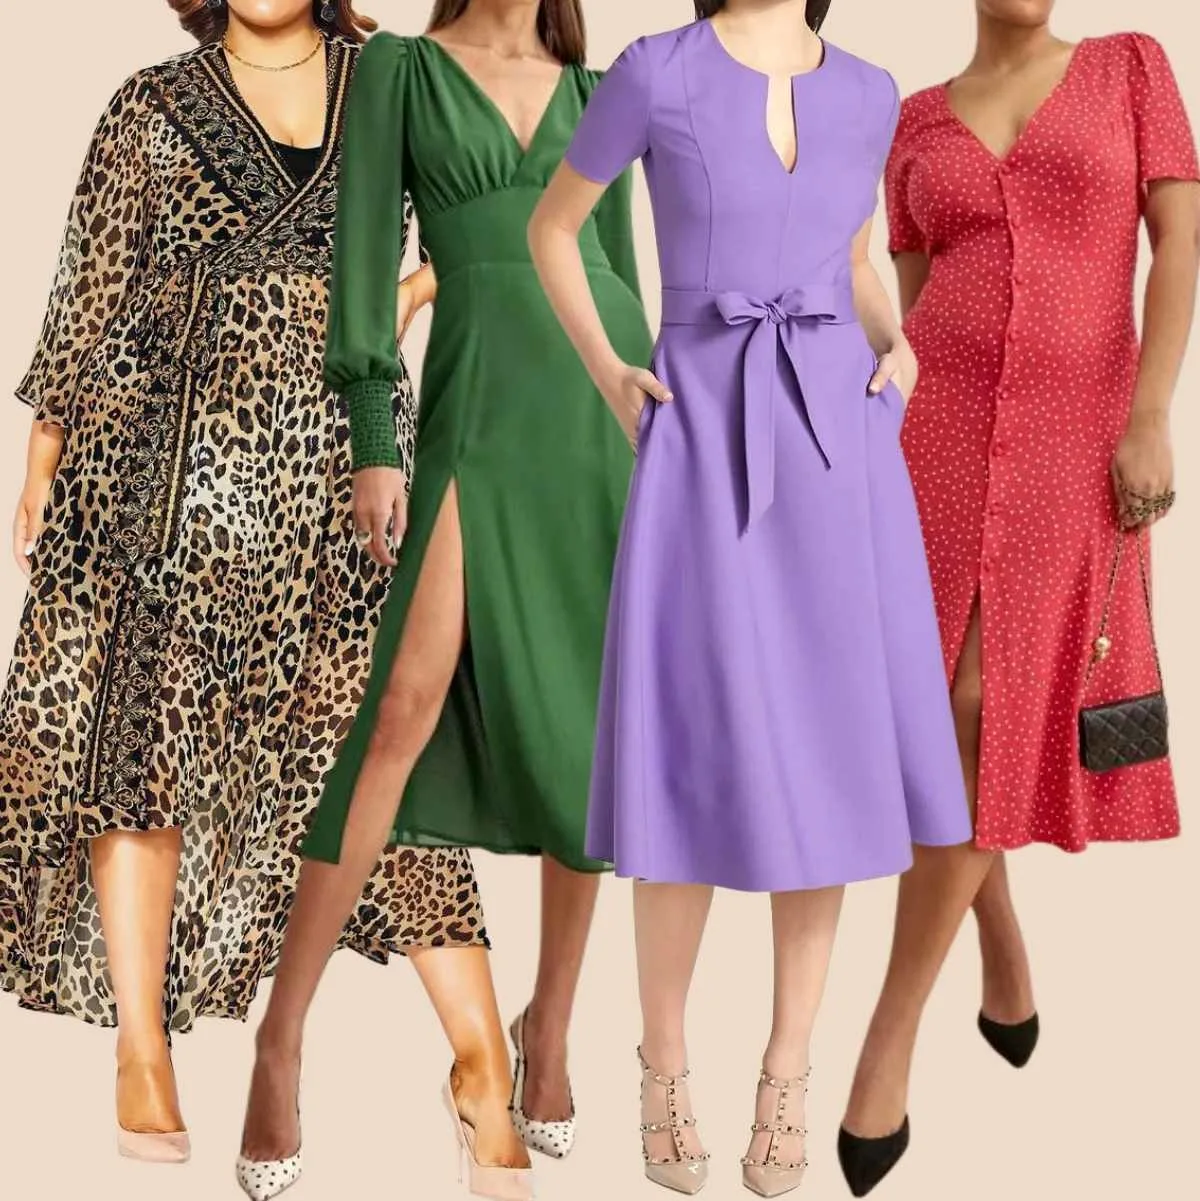 Collage of 4 women wearing different midi dresses with high heel pumps.